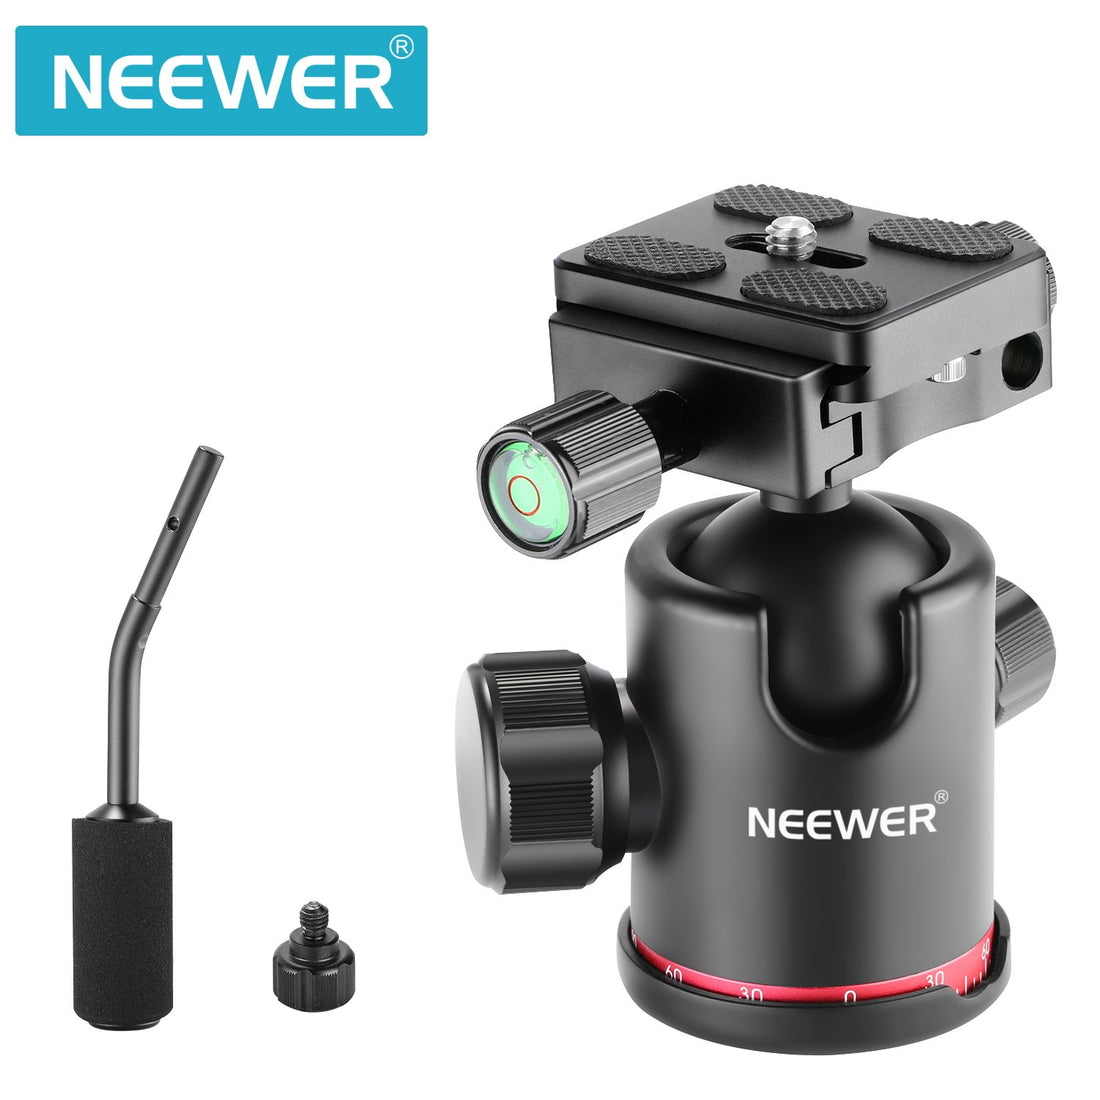 Neewer Heavy Duty Camera Tripod Ball Head with Handle and 1/4 inch Quick Shoe Plate, 360 Degree Panoramic Head for Tripod, Monopod, Slider, DSLR Camera, Camcorder, Load up to 17.6 pounds/8 kilograms